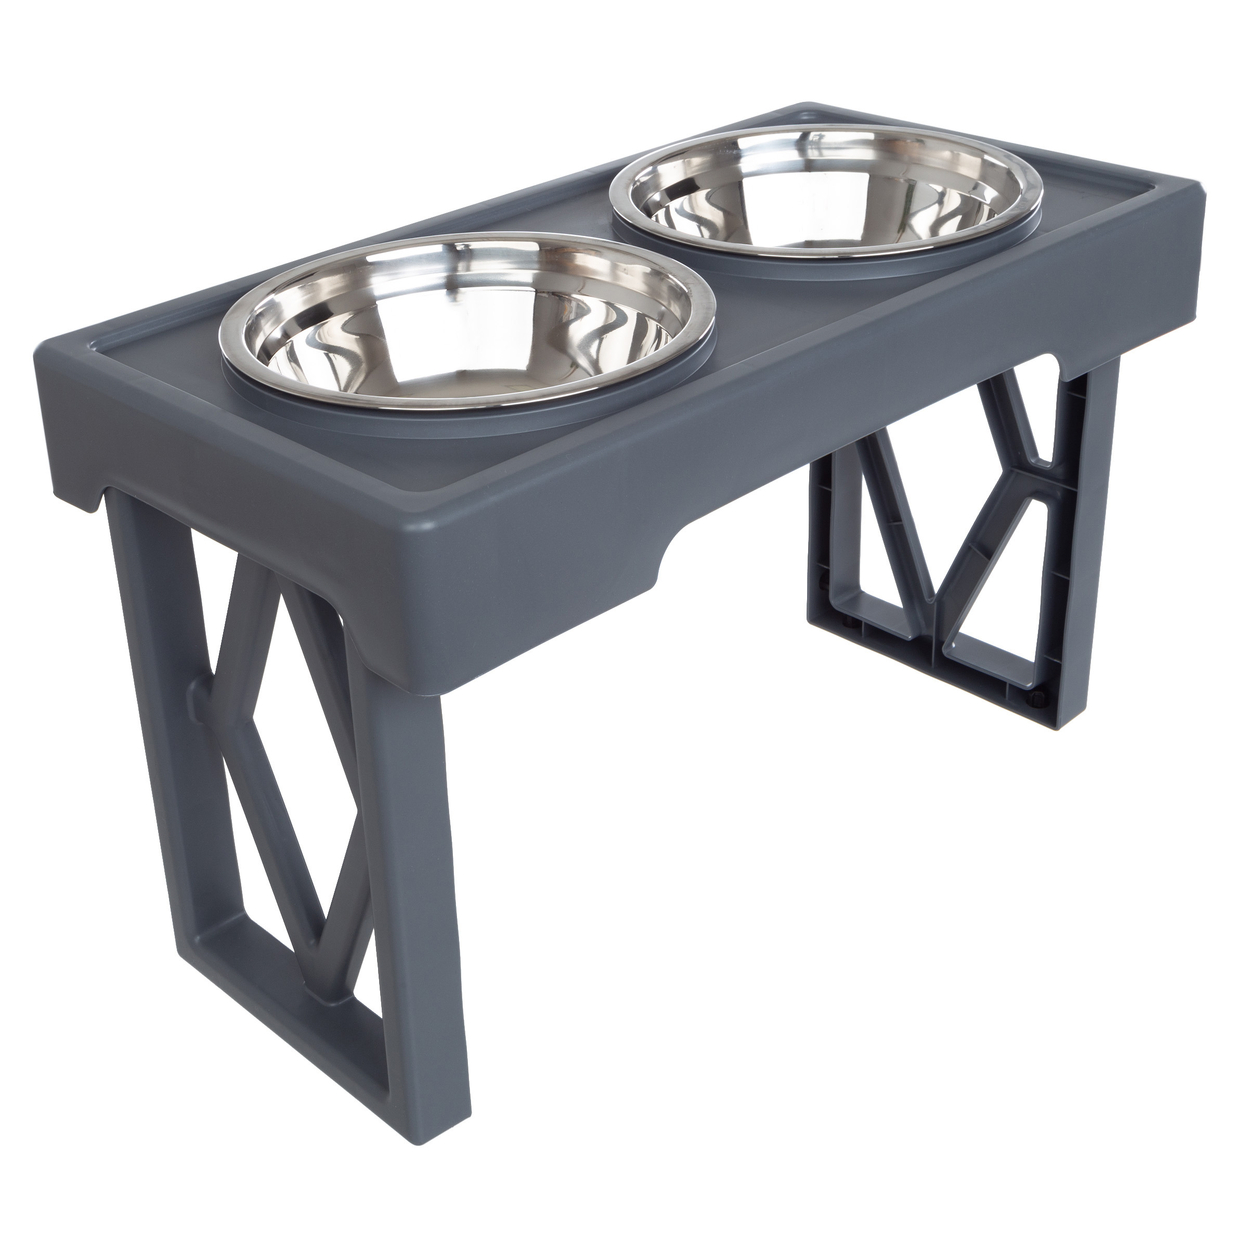 Elevated Dog Bowls Stand Adjusts To Small Medium Large Pets Hold 34oz Gray